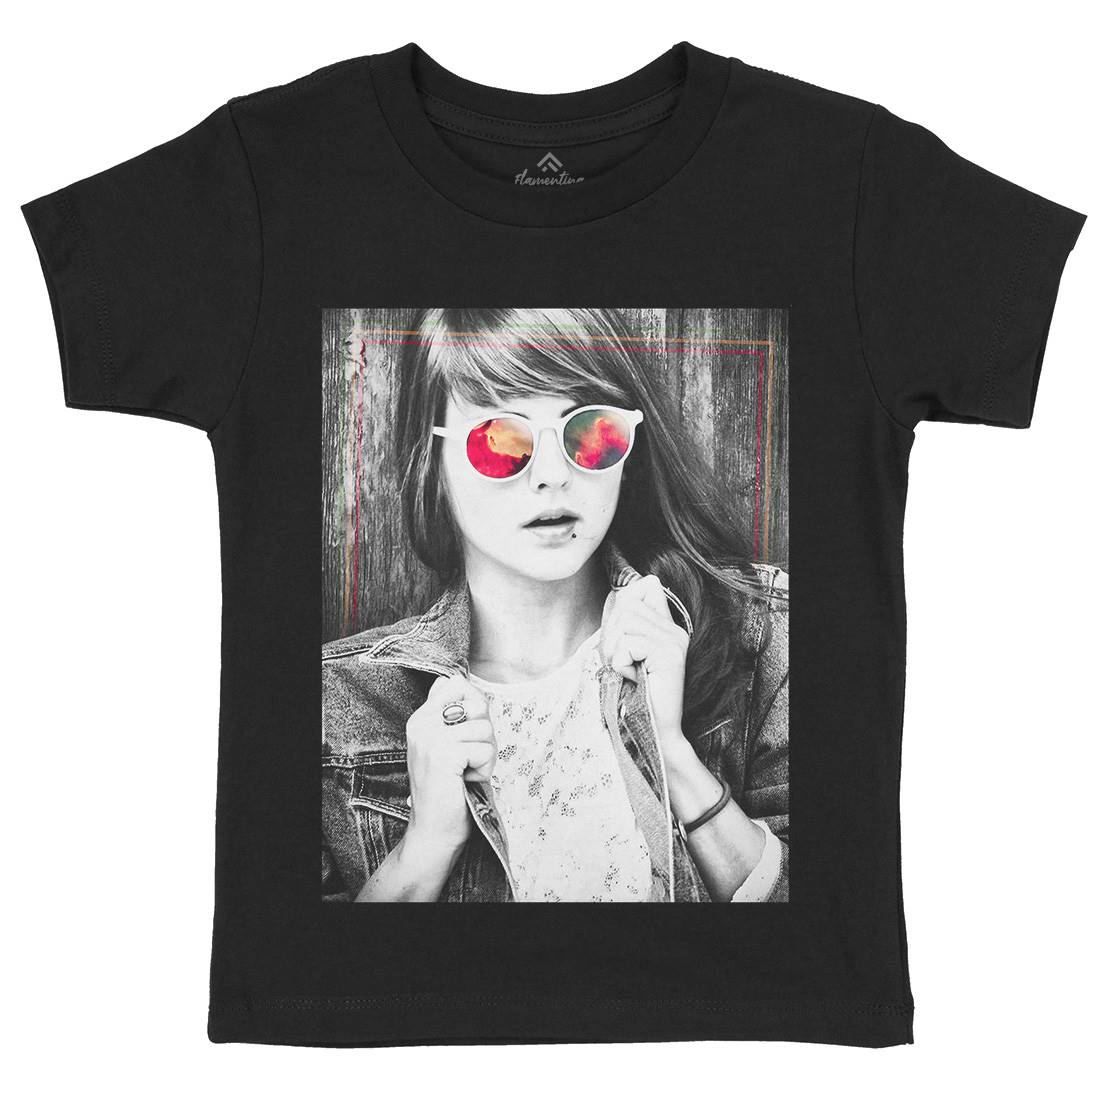 Seeing Is Believing Kids Crew Neck T-Shirt Art A904